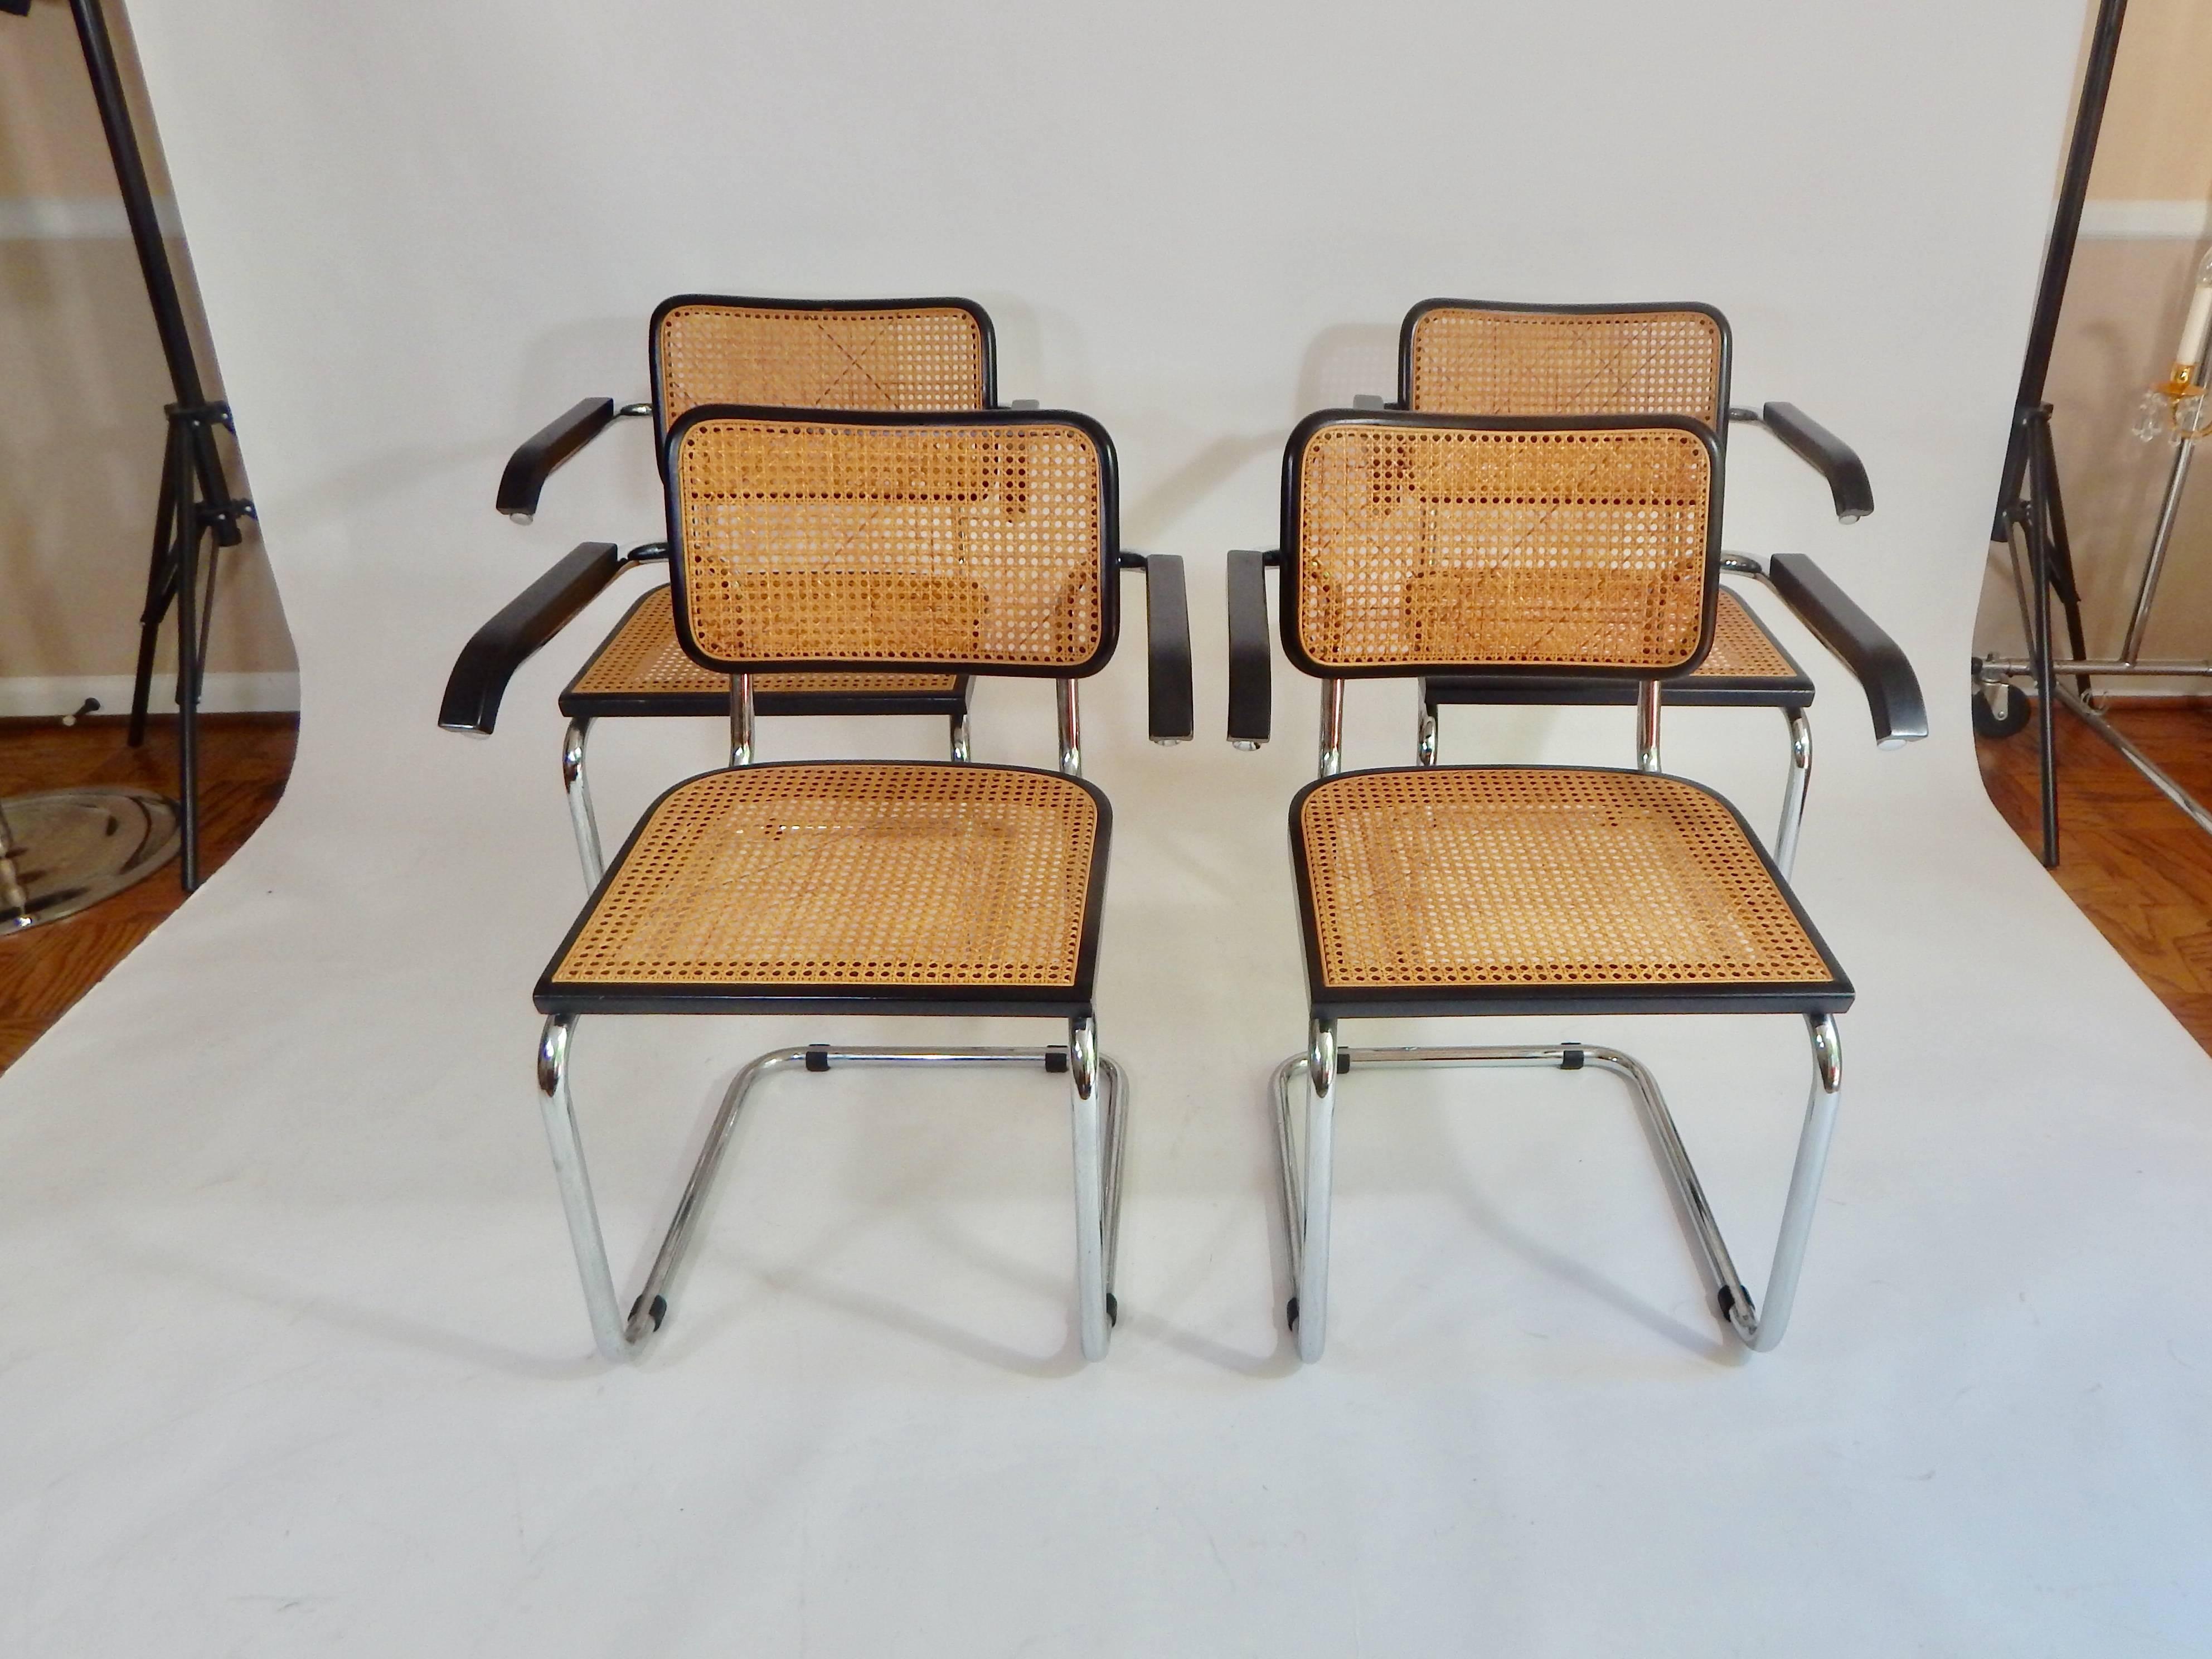 1960s Marcel Breuer Cesca chairs. Made in Italy. Wood has black finish with cane seats and backrests and chrome frames, midcentury 1960s production. Rare to find a complete matching set where all chairs are in this level of condition with caning